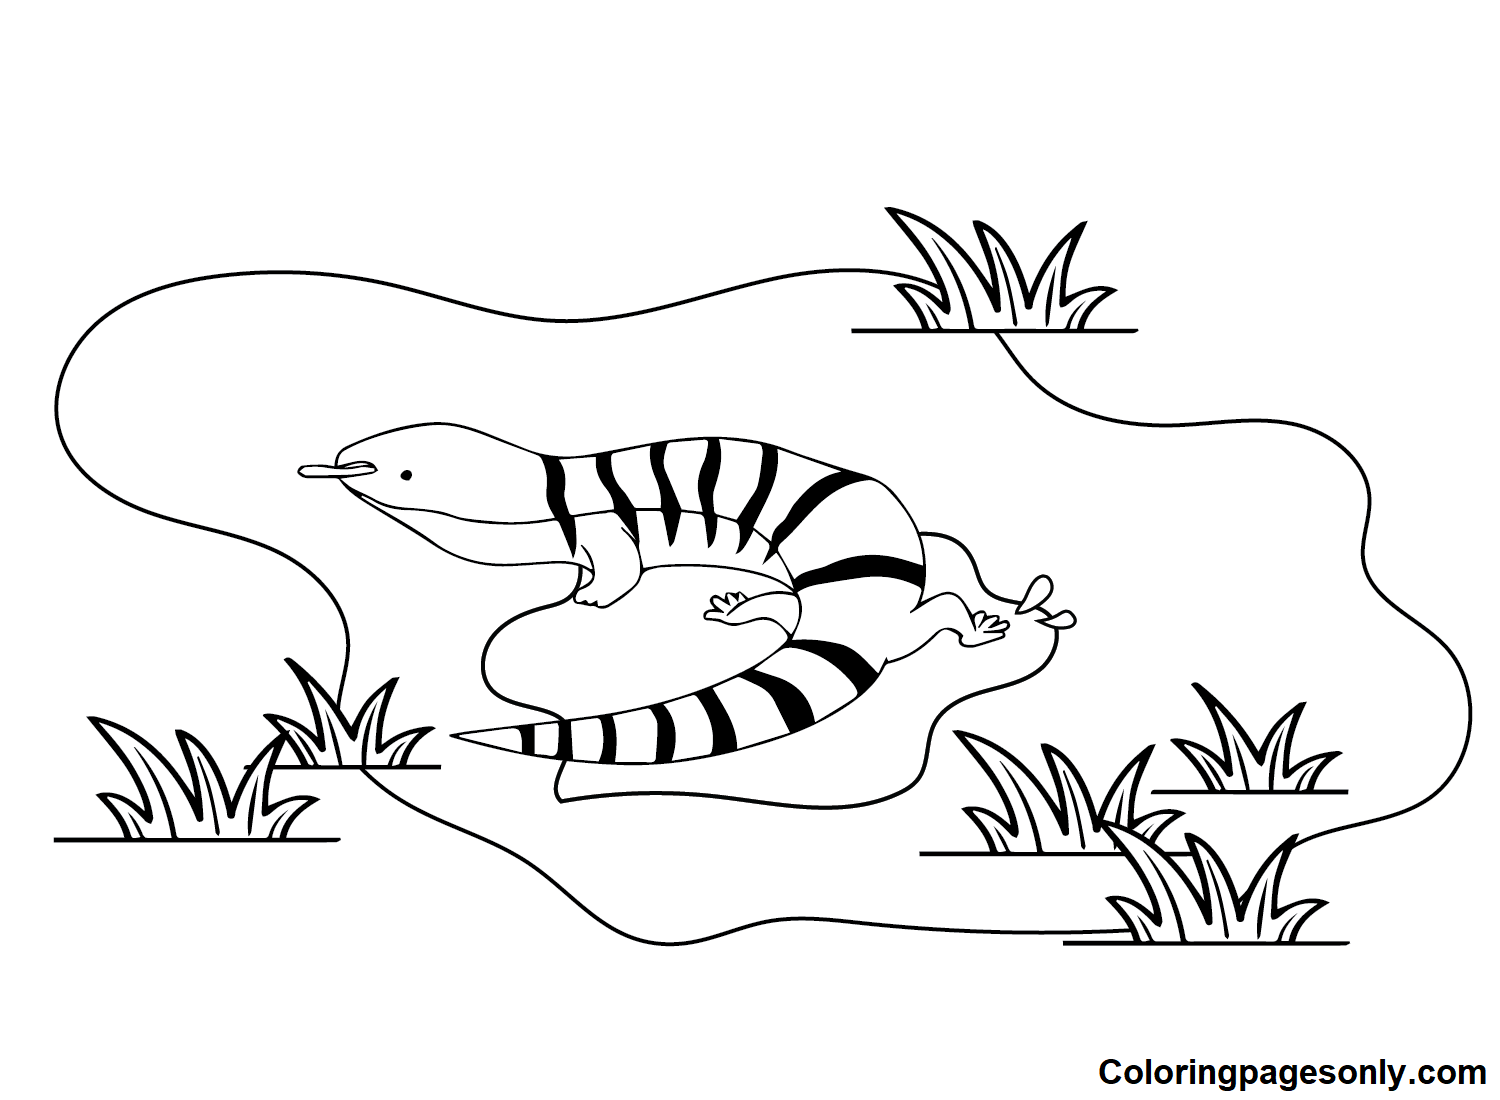 Skink color Sheets Coloring Pages